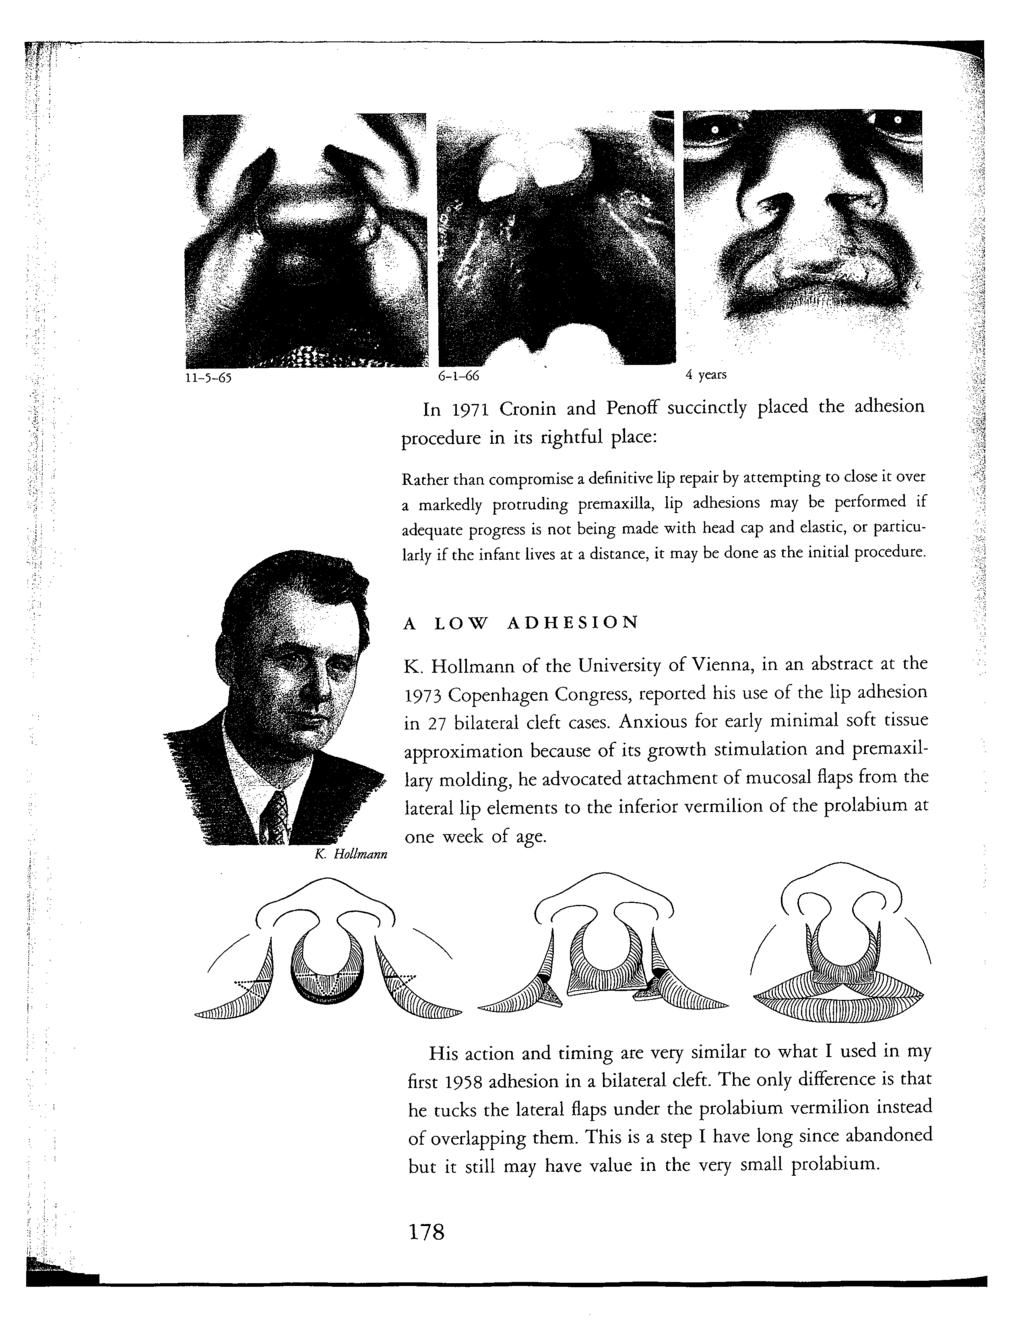 1971 CRONIN AND PENOFF SU PLACED THE ADHESION RIGHTFUL PLACE RATHER THAN COMPROMISE DEFINITIVE LIP REPAIR BY ATTEMPTING TO CLOSE IT OVER MARKEDLY PROTRUDING PREMAXILLA LIP ADHESIONS MAY BE PERFORMED